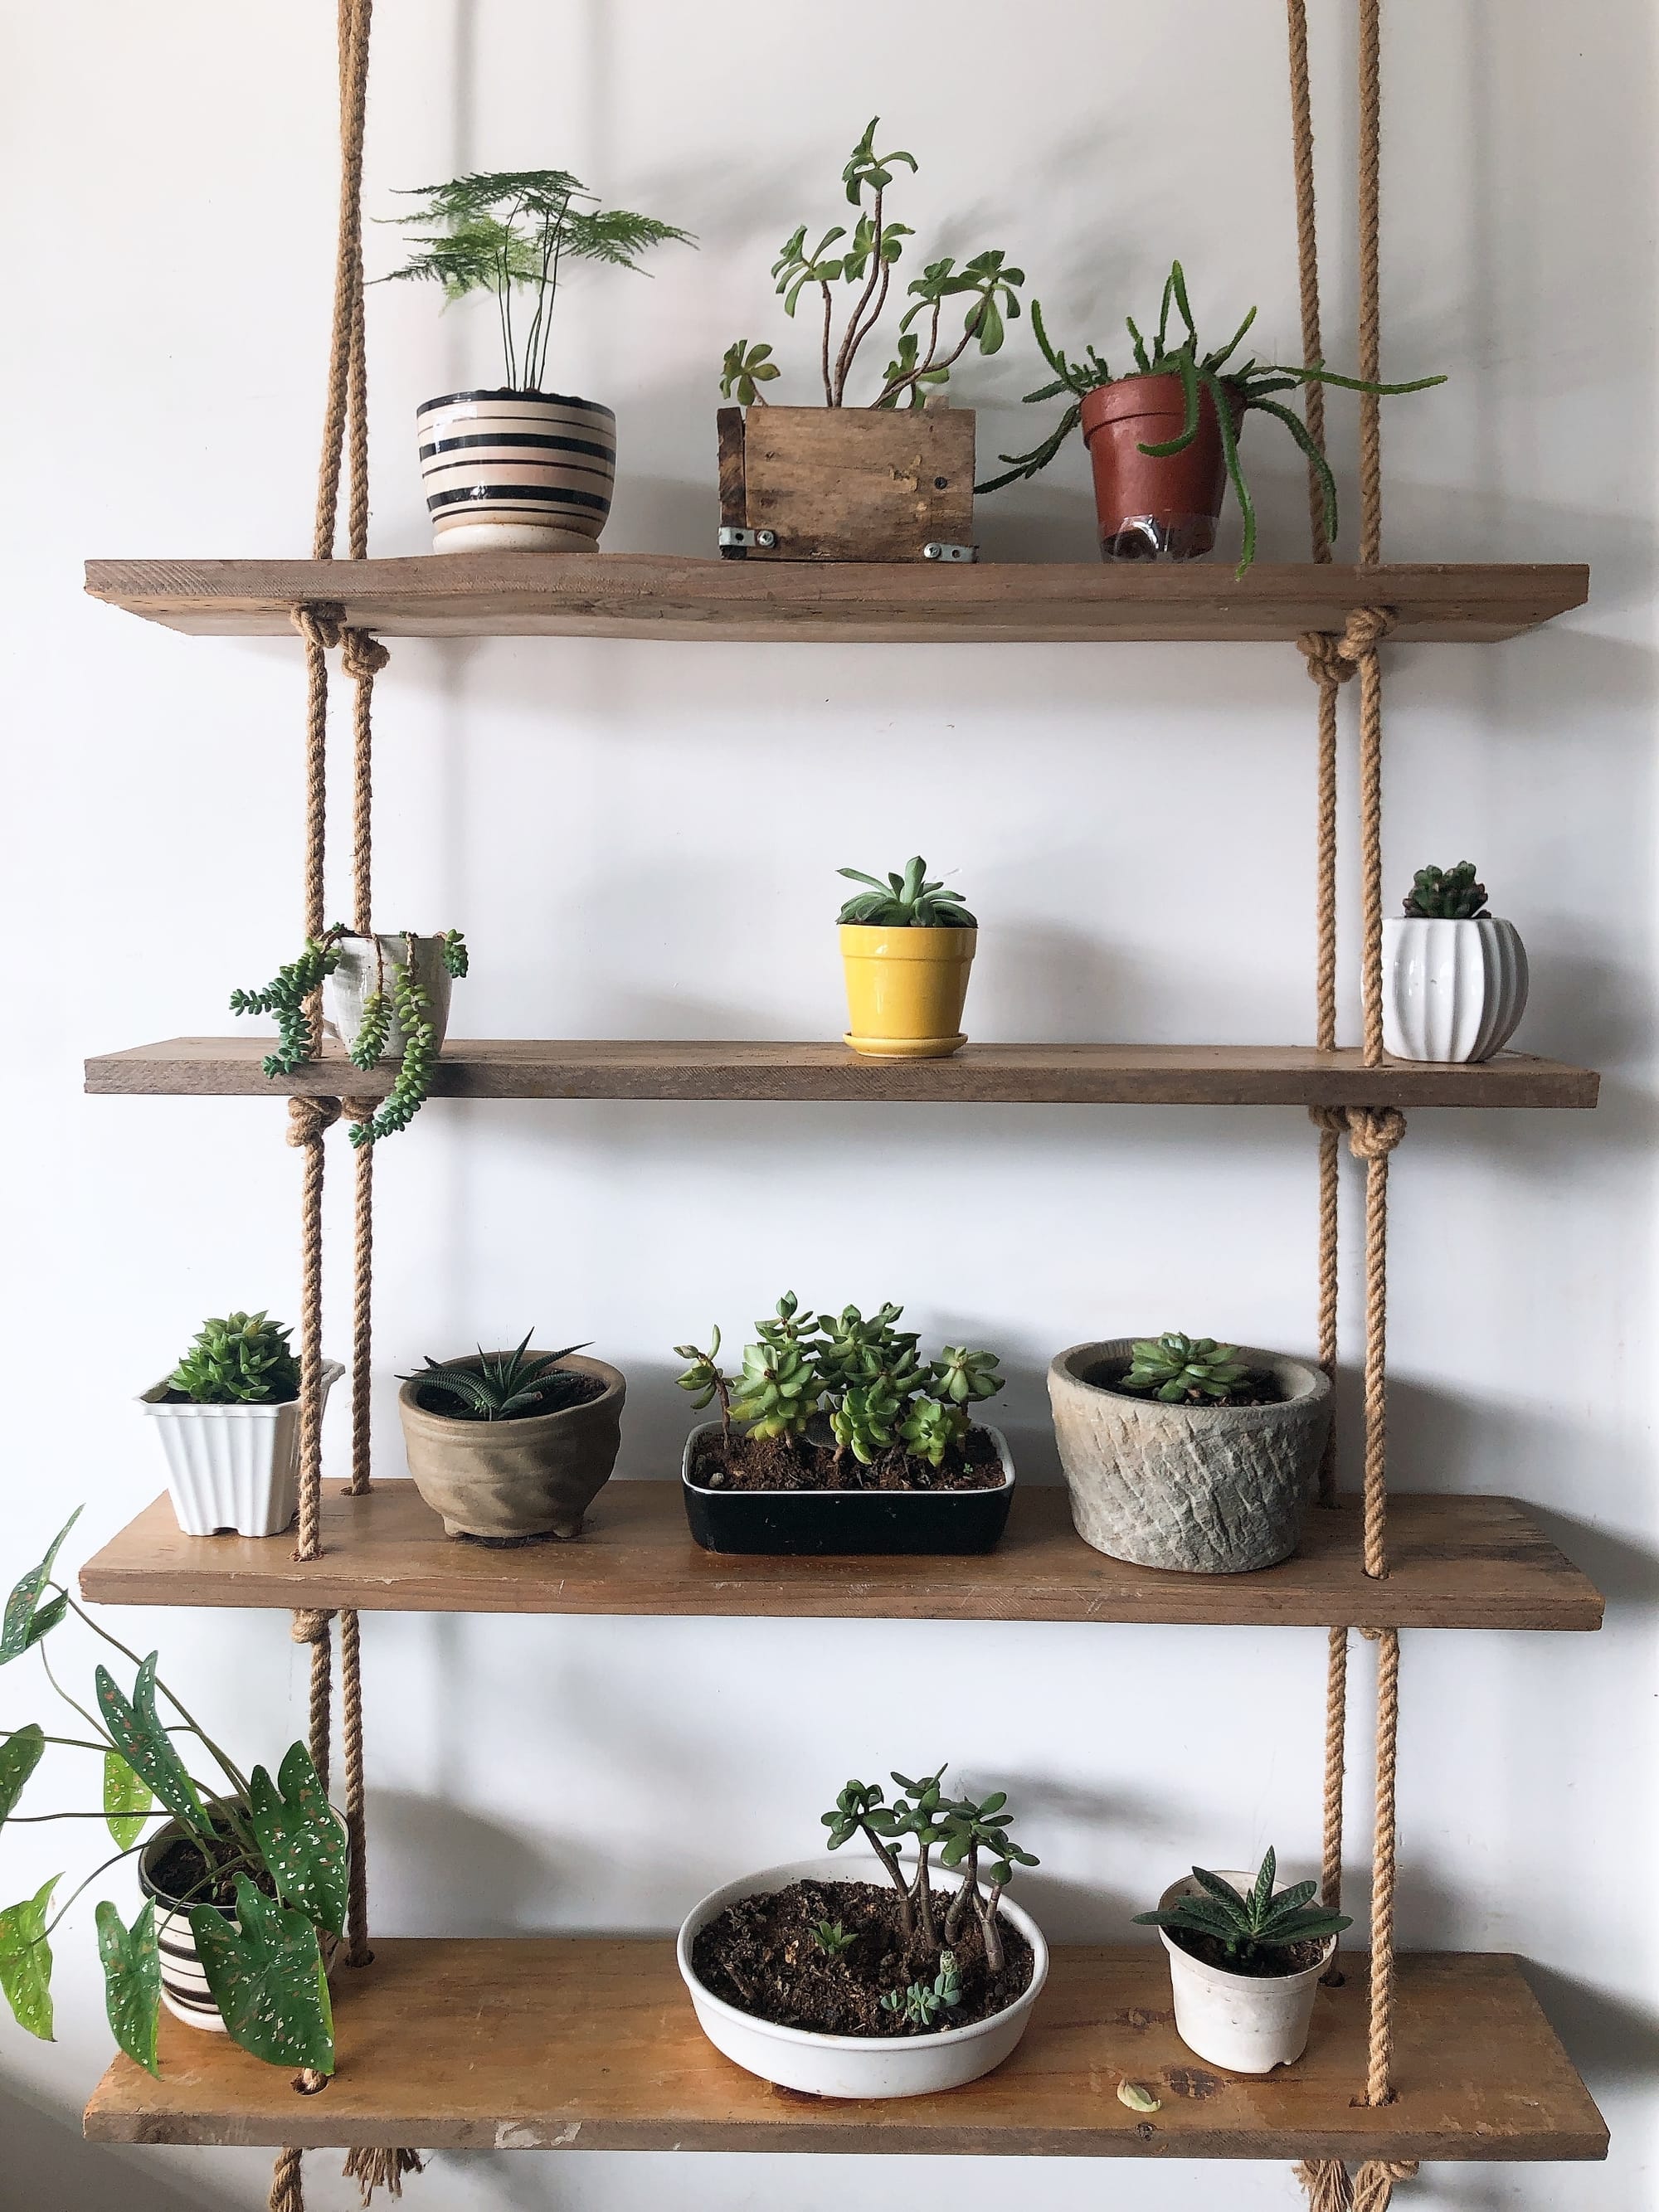 Hanging shelf with plants